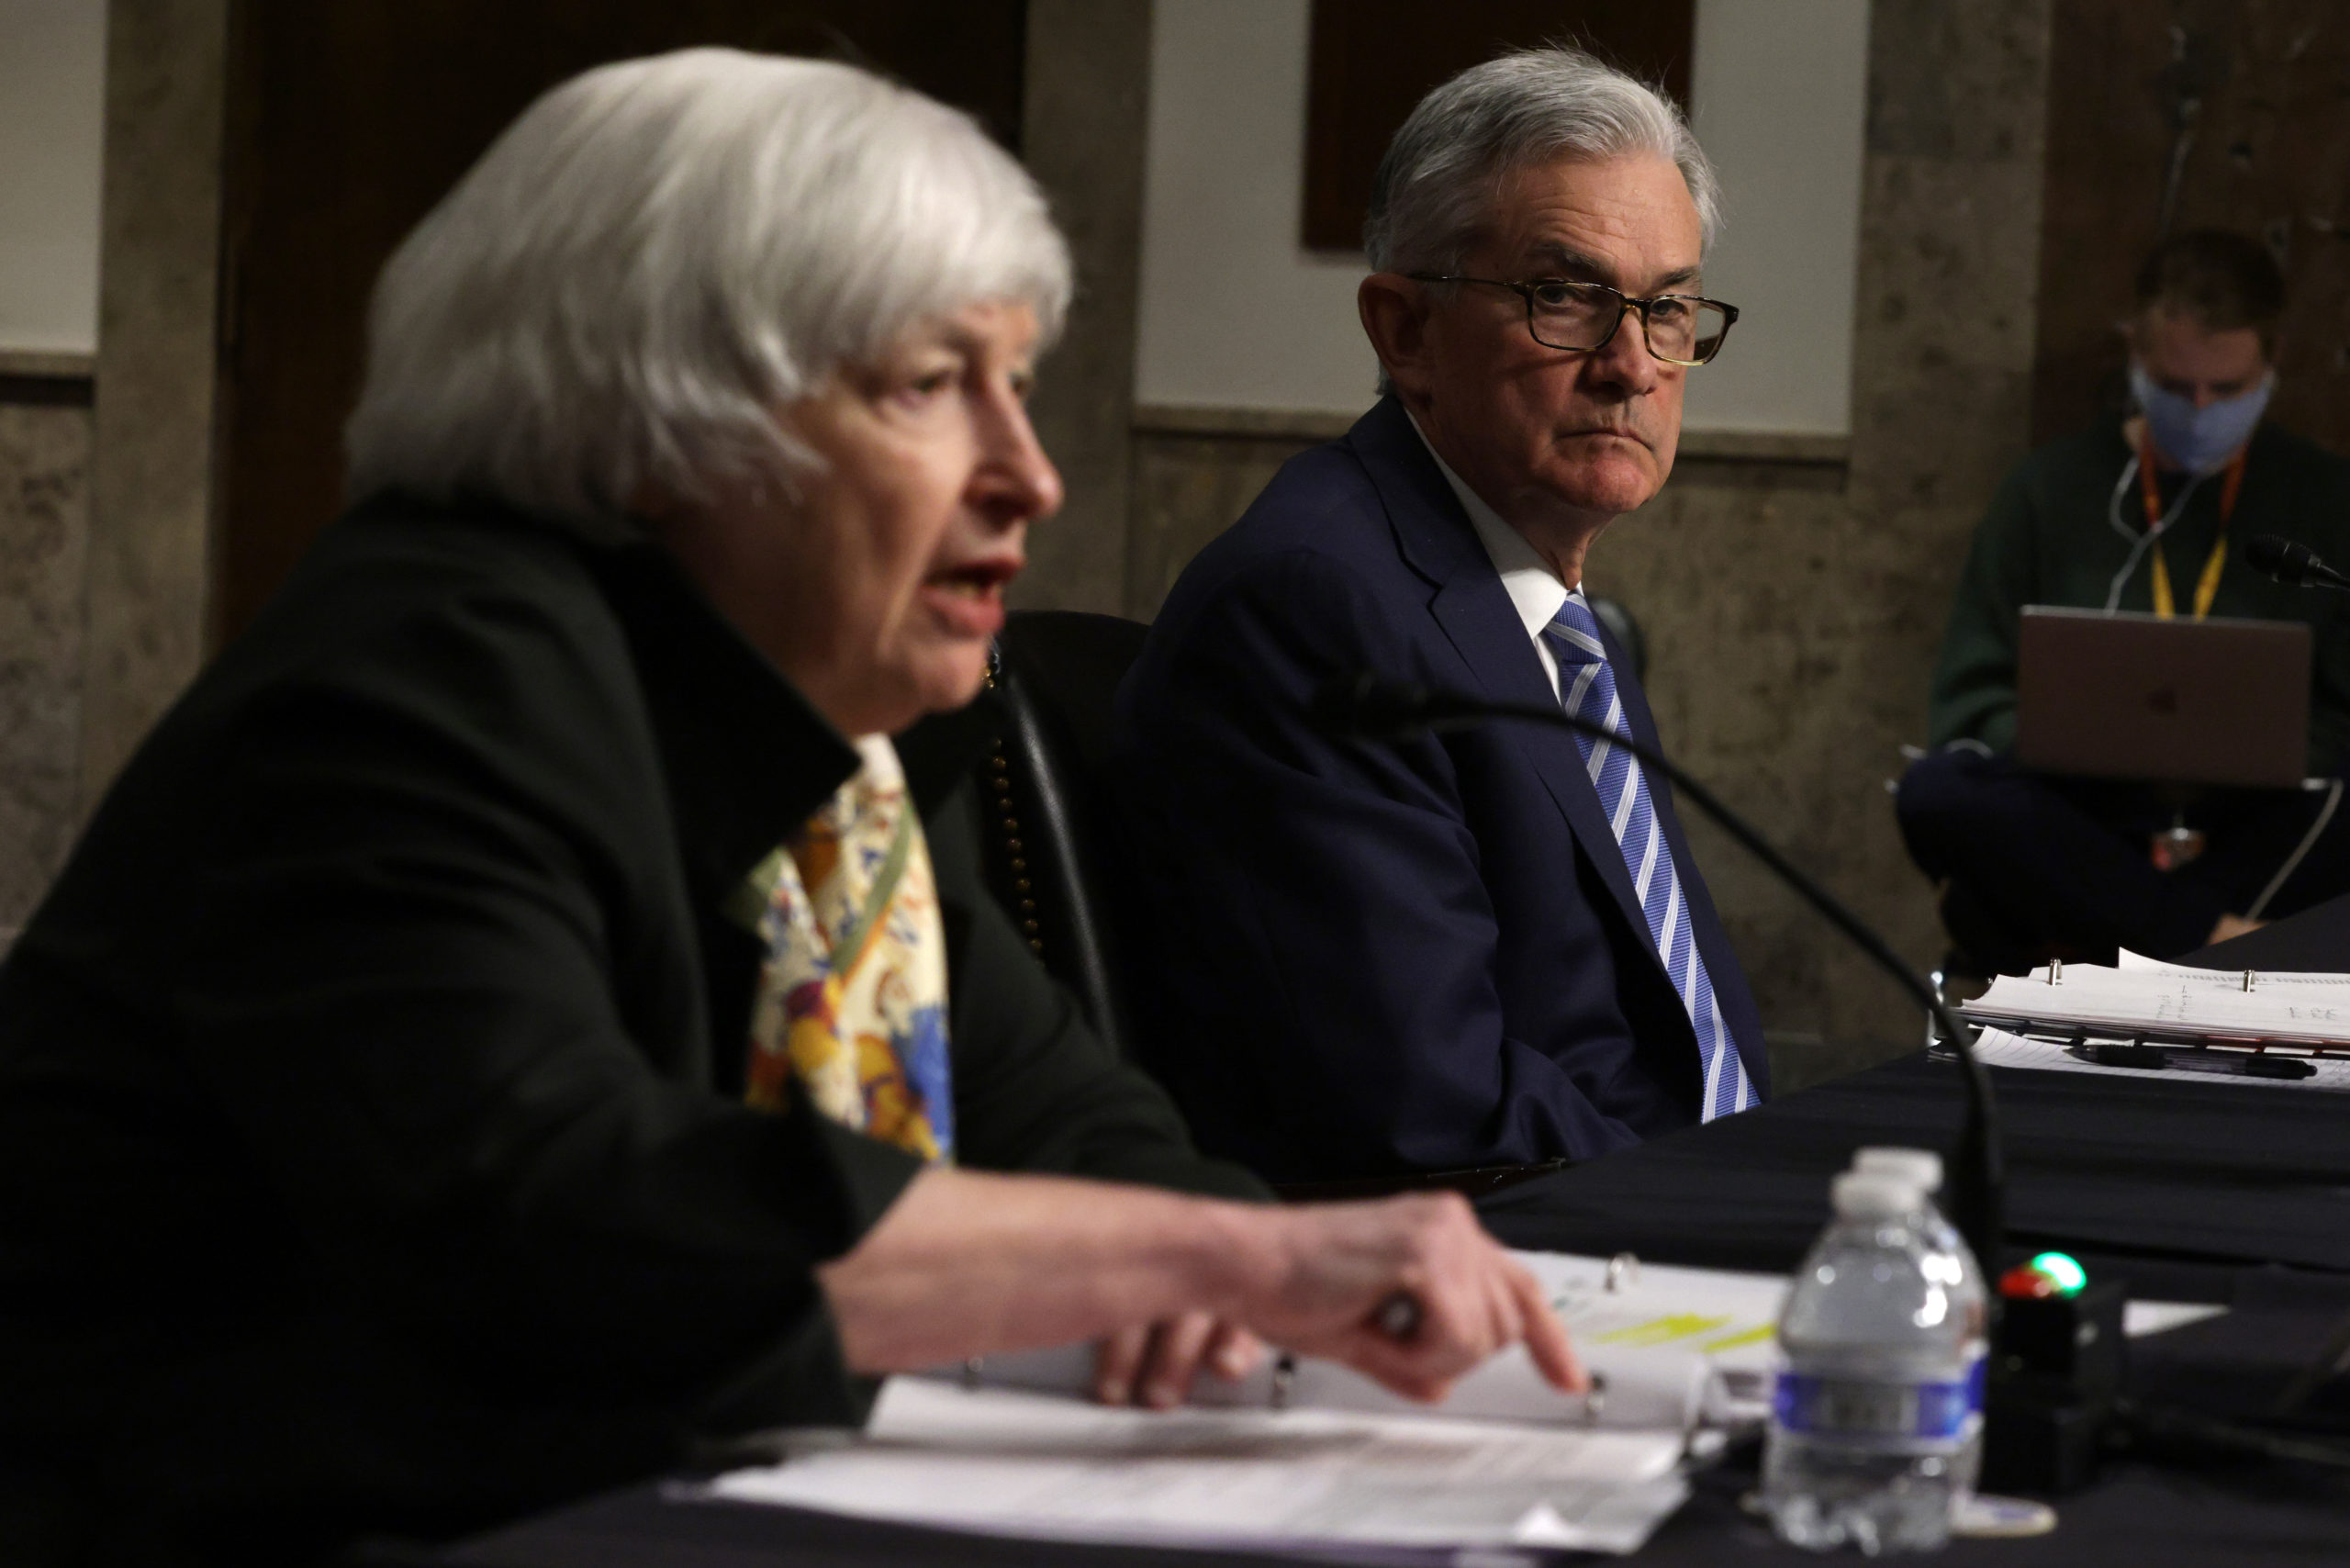 U.S. Treasury Secretary Janet Yellen (L) and Federal Reserve Board Chairman Jerome Powell (R) testify during a hearing before Senate Banking, Housing and Urban Affairs Committee on Capitol Hill November 30, 2021 in Washington, DC. (Photo by Alex Wong/Getty Images)